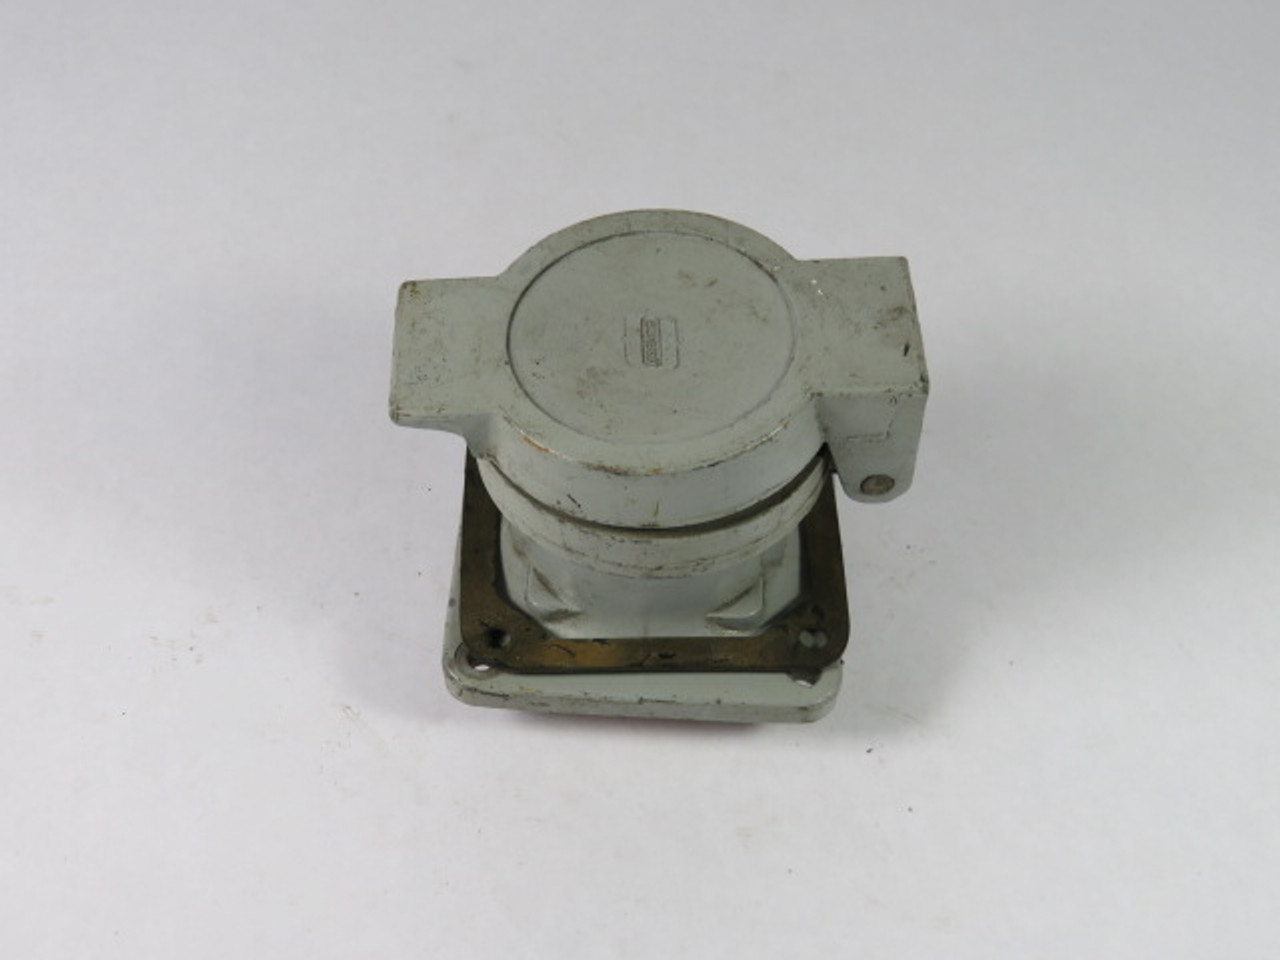 Crouse-Hinds AR331 Receptacle 30A 600VAC 3W 3P ! AS IS !